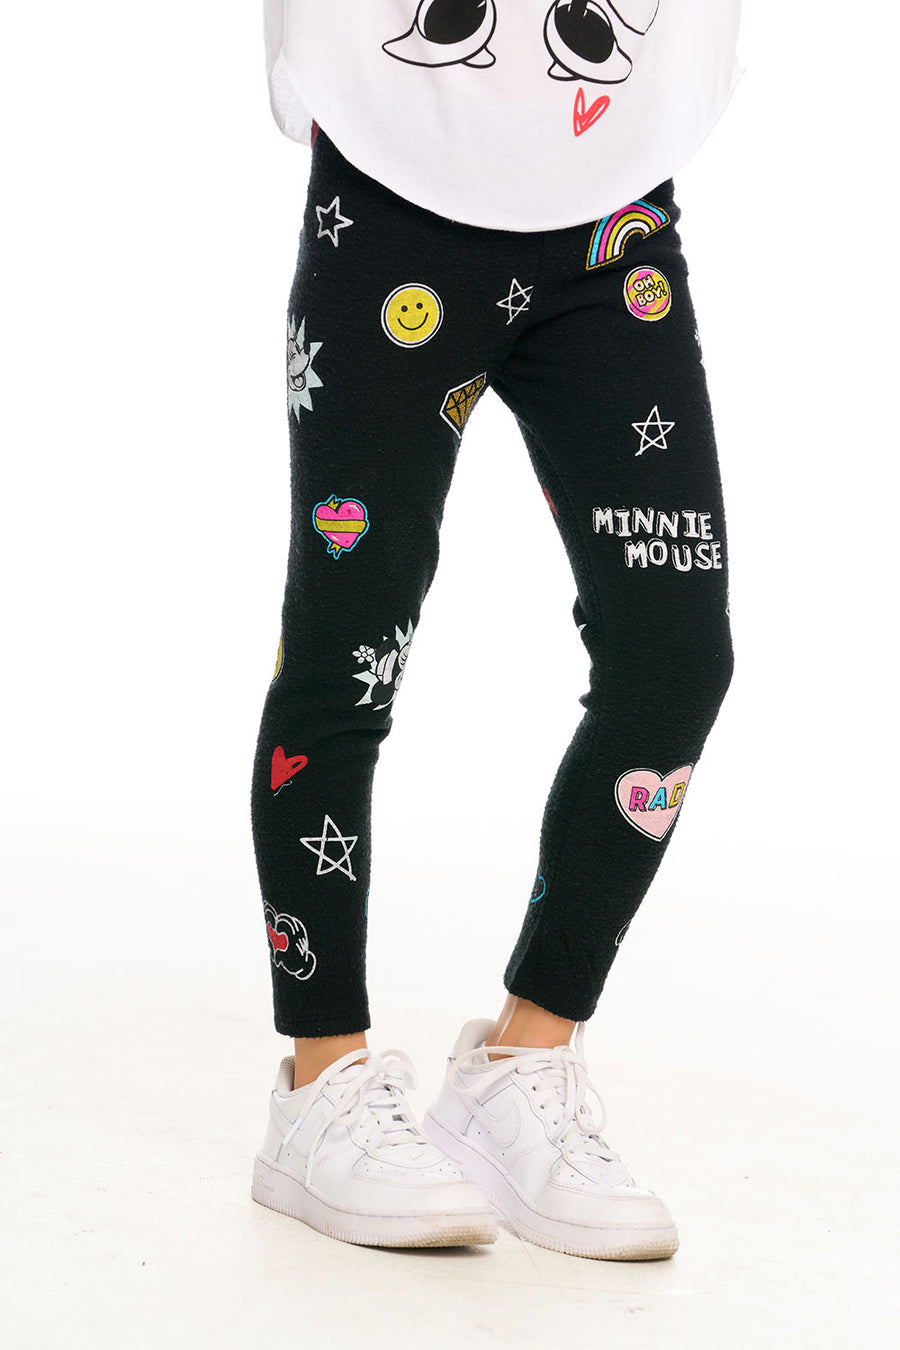 Disney's Minnie Mouse - Hearts & Smiles GIRLS chaserbrand